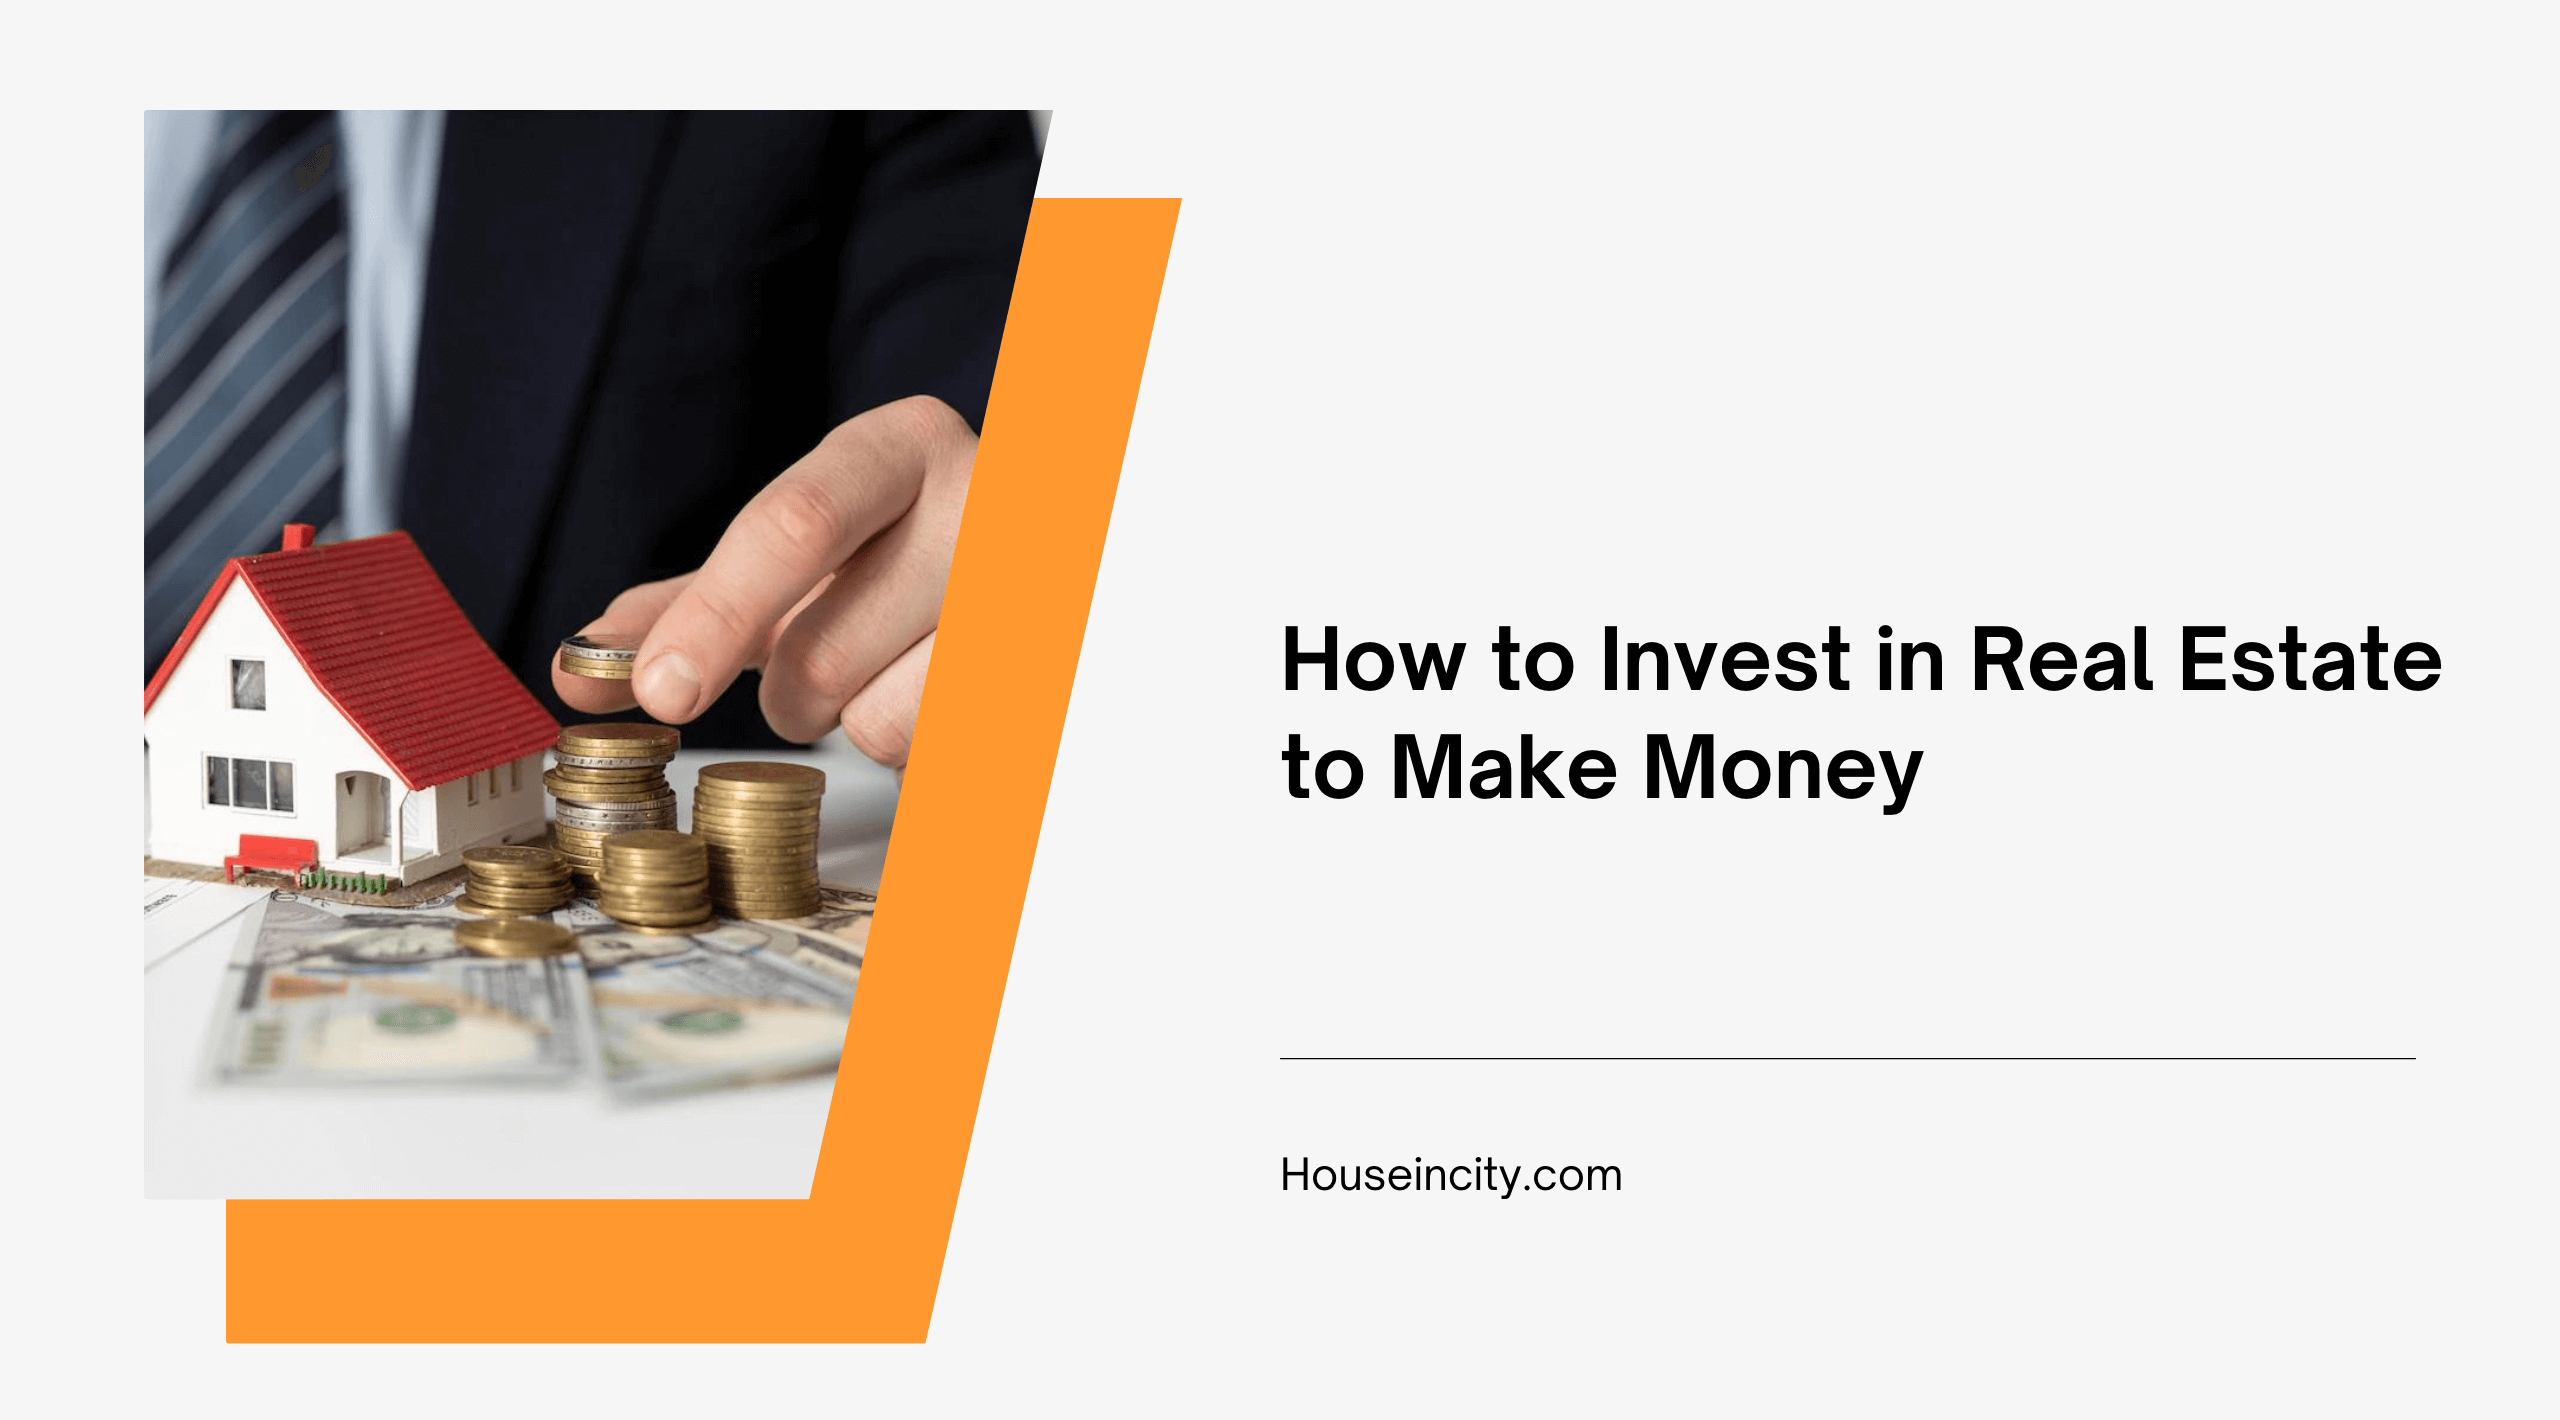 How to Invest in Real Estate to Make Money